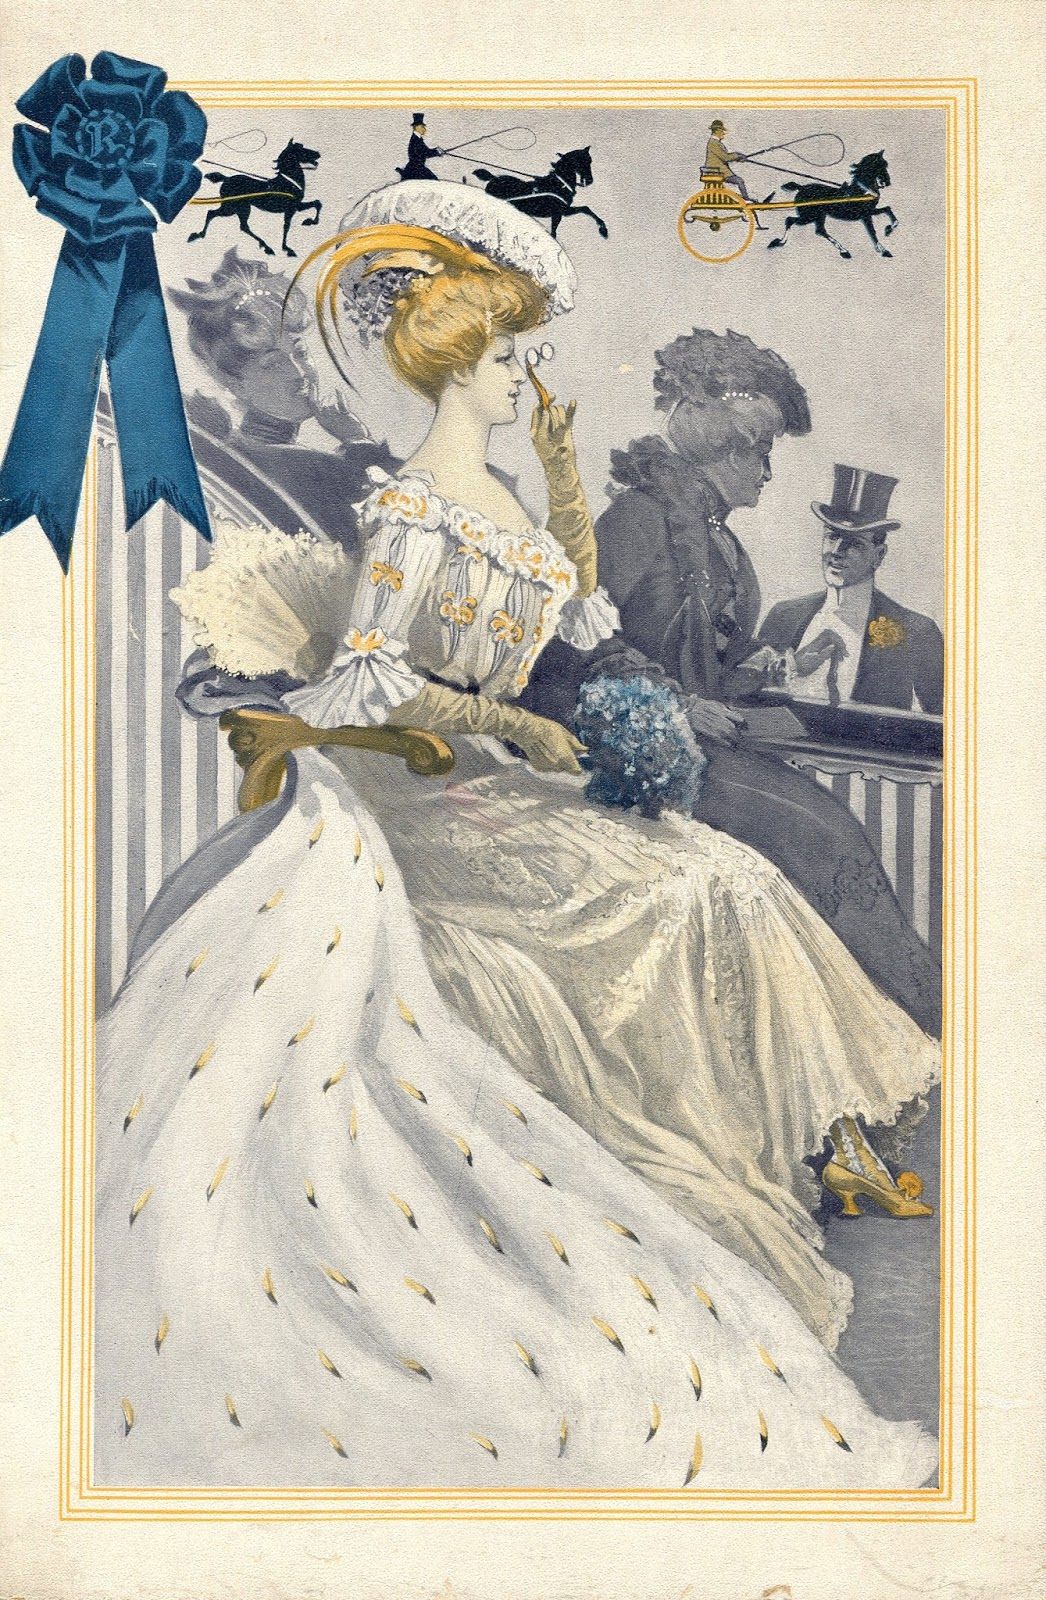 A menu from Rector's, a Gilded-Age restaurant in New York. 